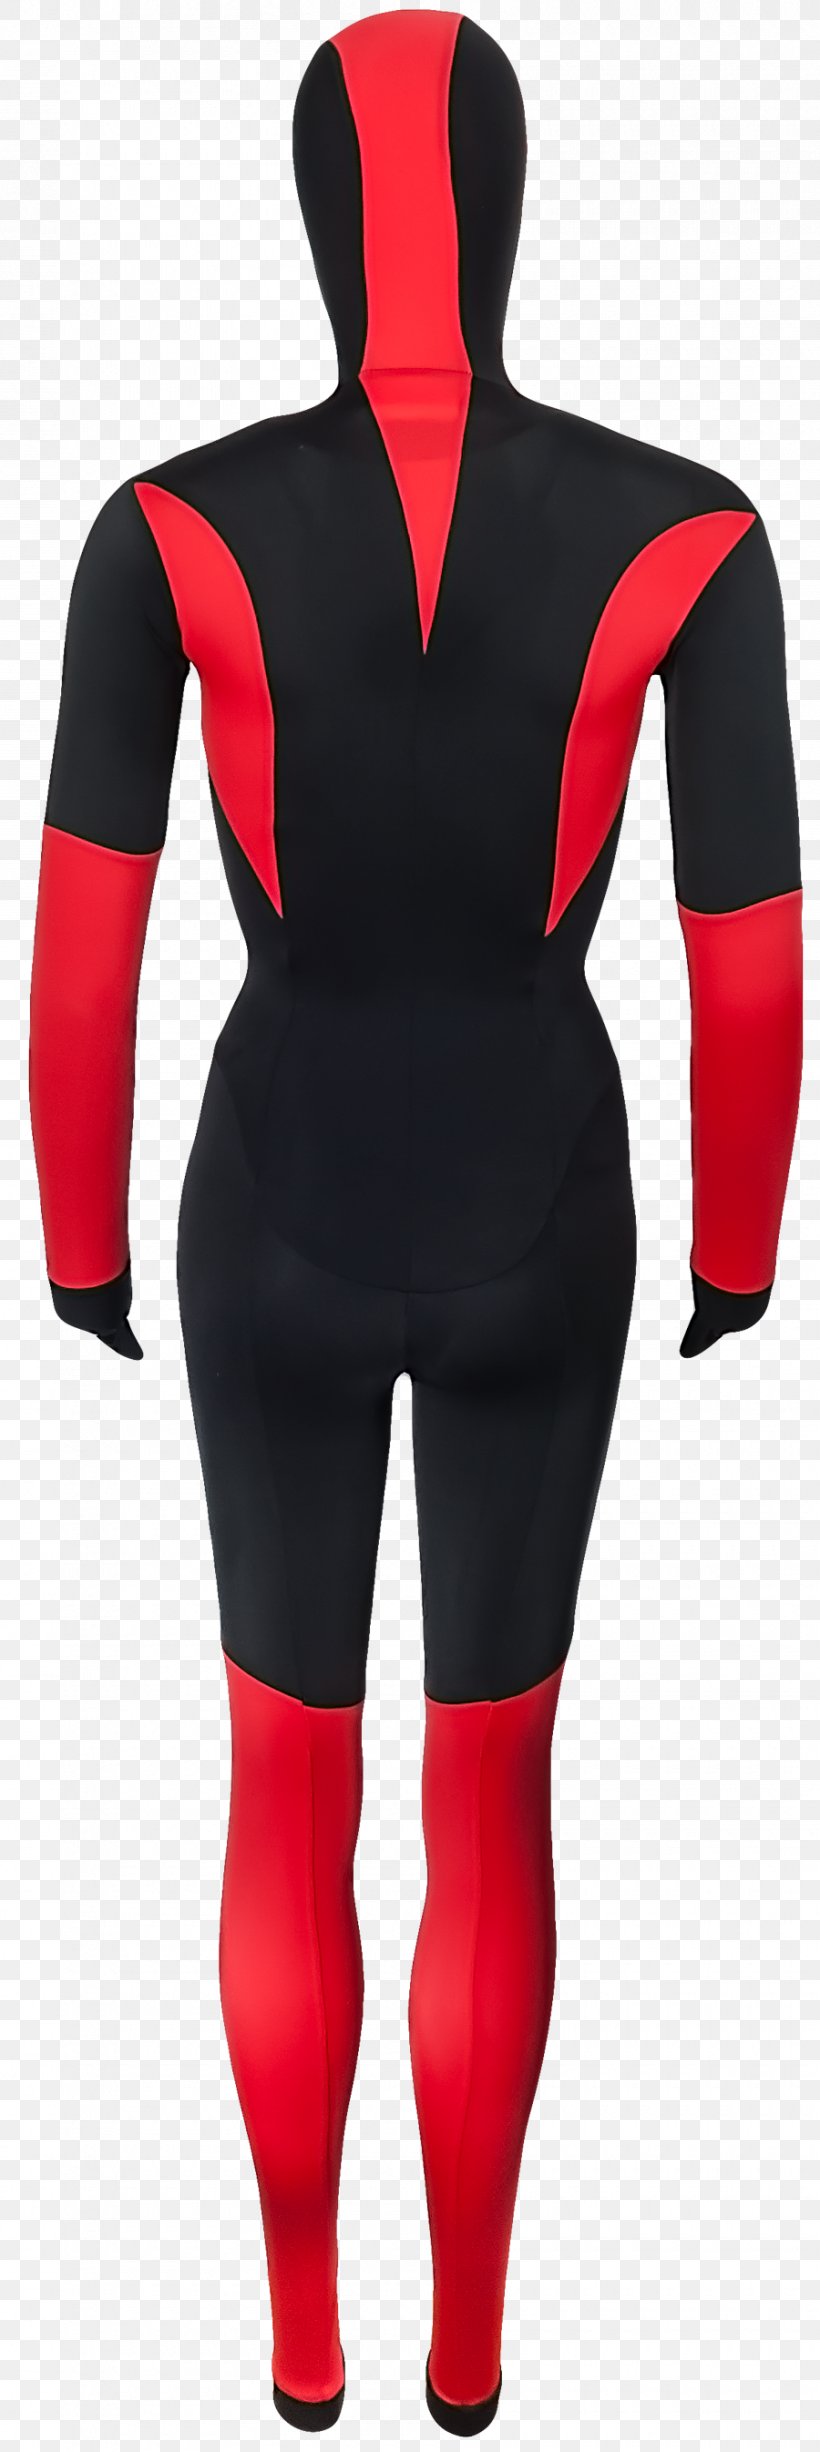 Wetsuit Spandex Shoulder Character Fiction, PNG, 900x2692px, Wetsuit, Character, Costume, Fiction, Fictional Character Download Free